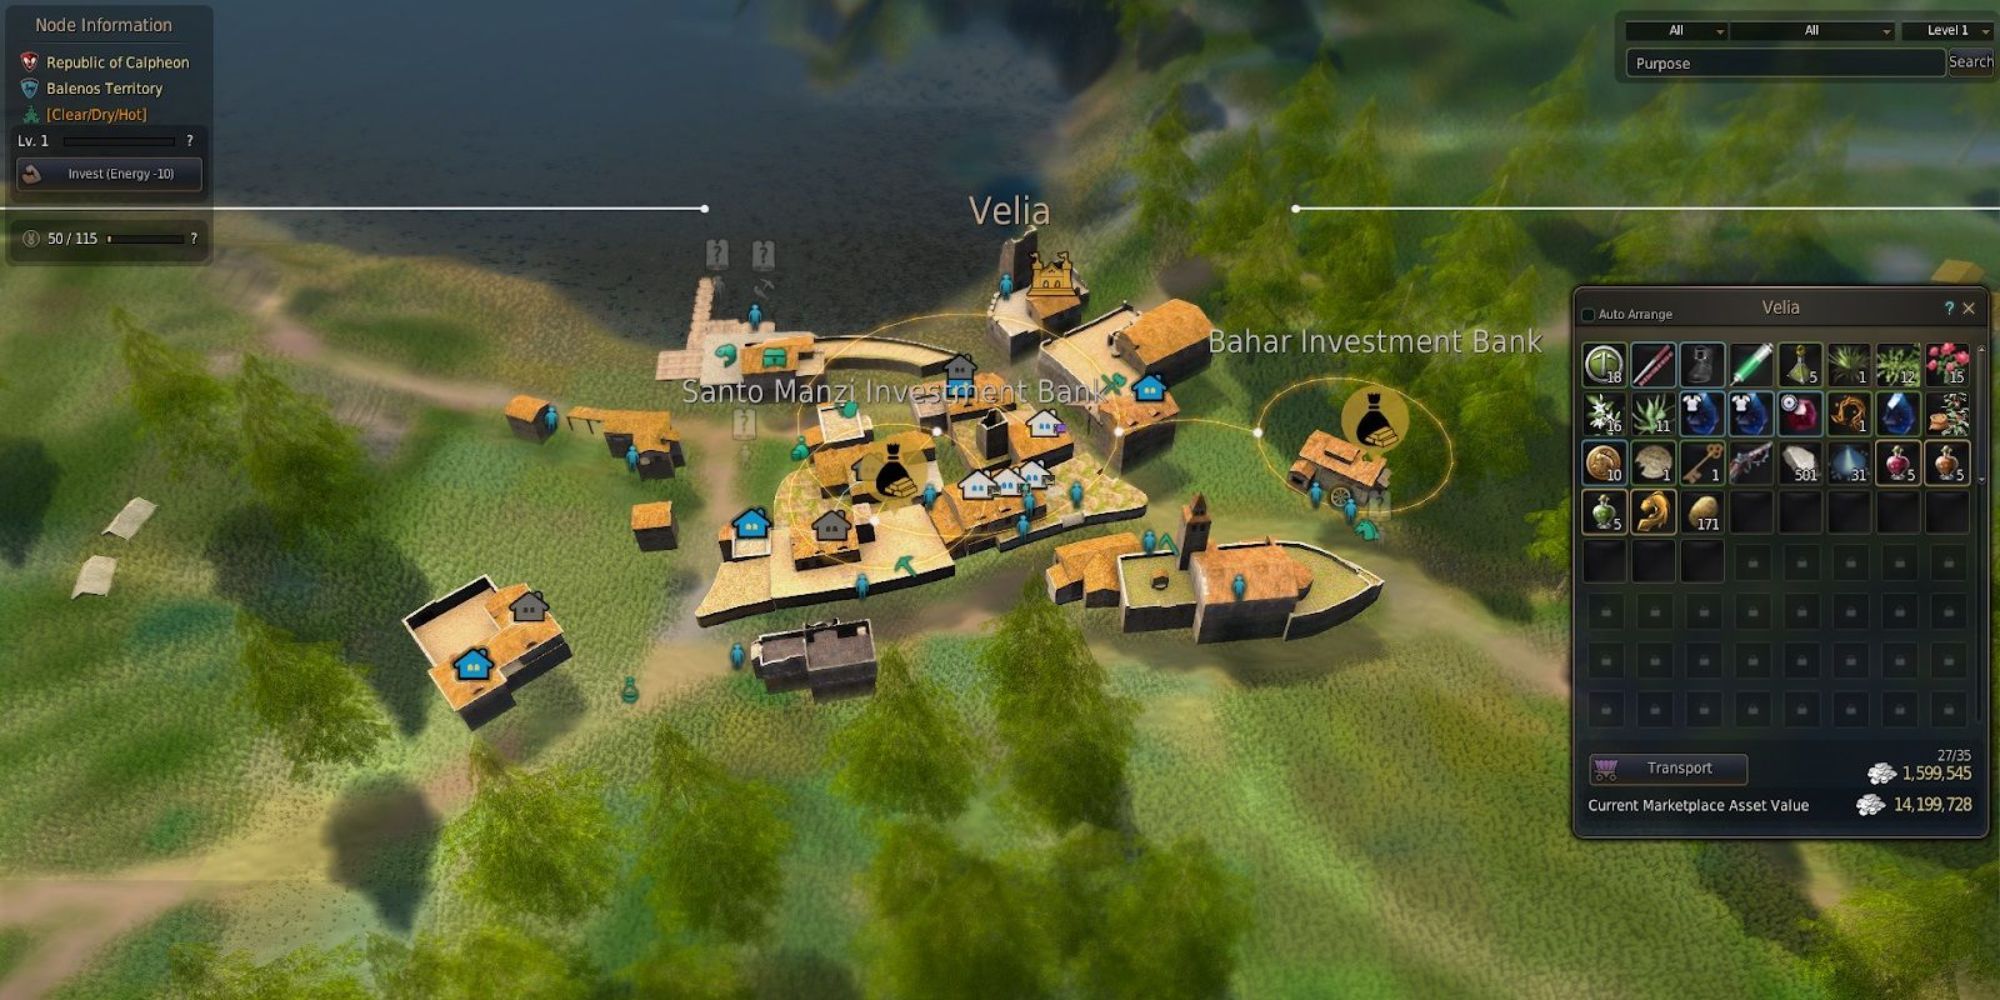 bdo village view from management screen